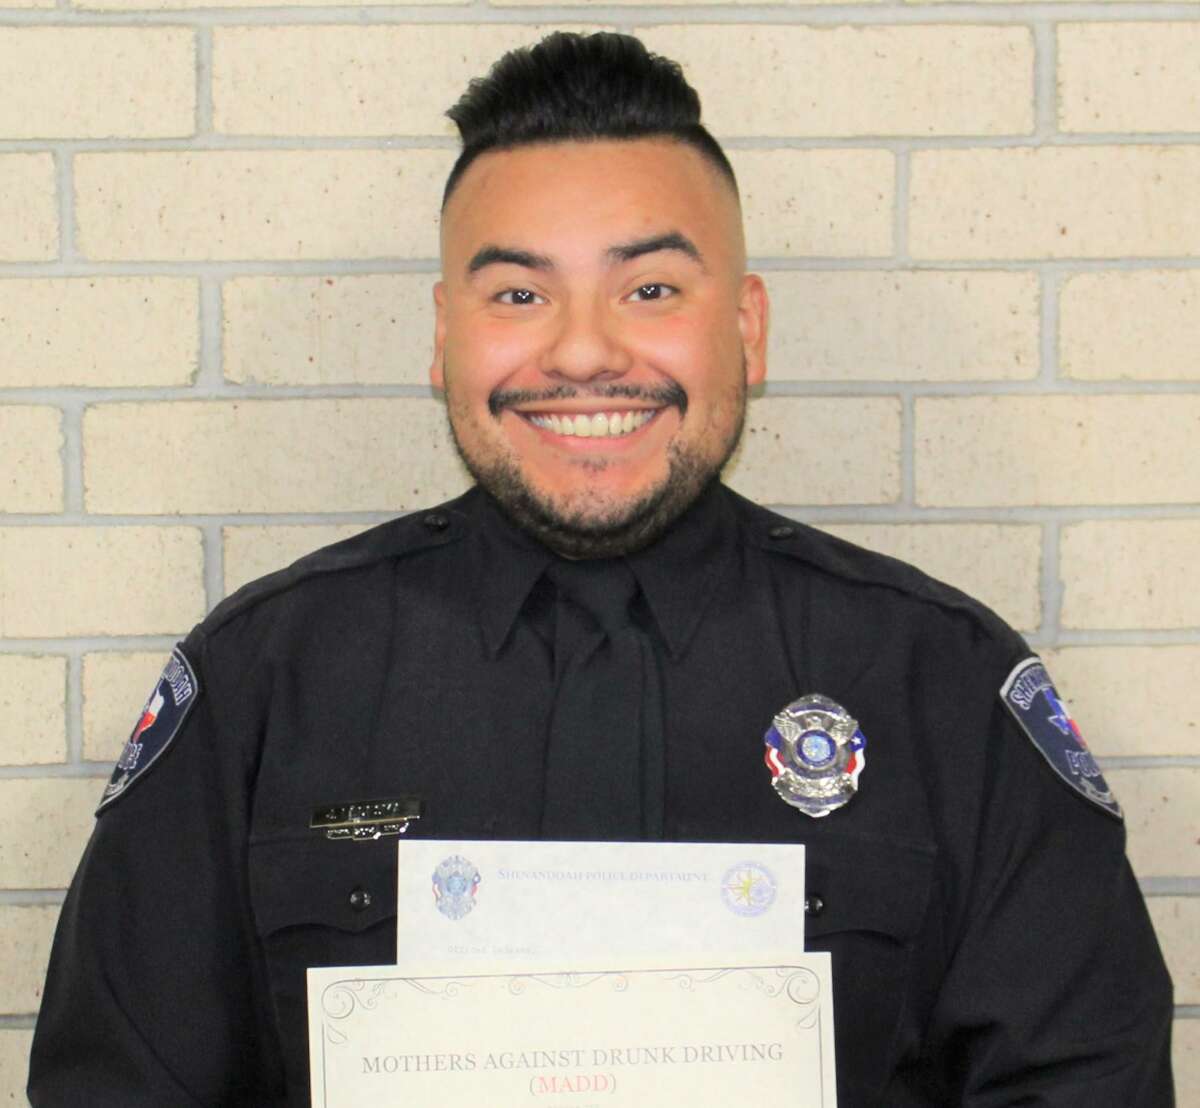 Shenandoah Police Department Officer Jeremiah Ledesma received on Oct. 14 an award from Mothers Against Drunk Driving.